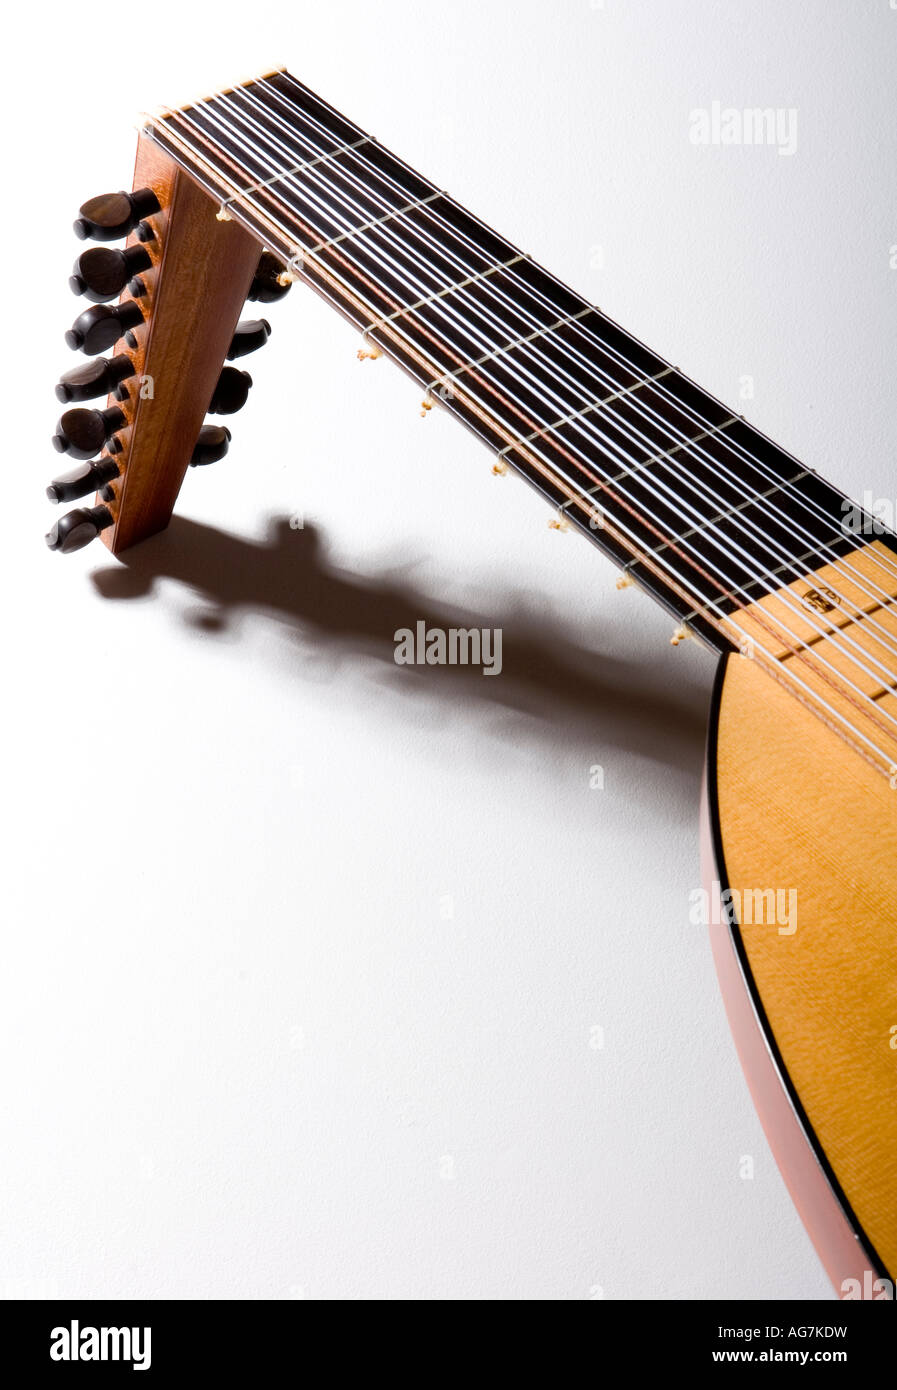 Detail of a 7 course renaissance lute made in 2005 by luthier Steven Gottlieb, London. Stock Photo